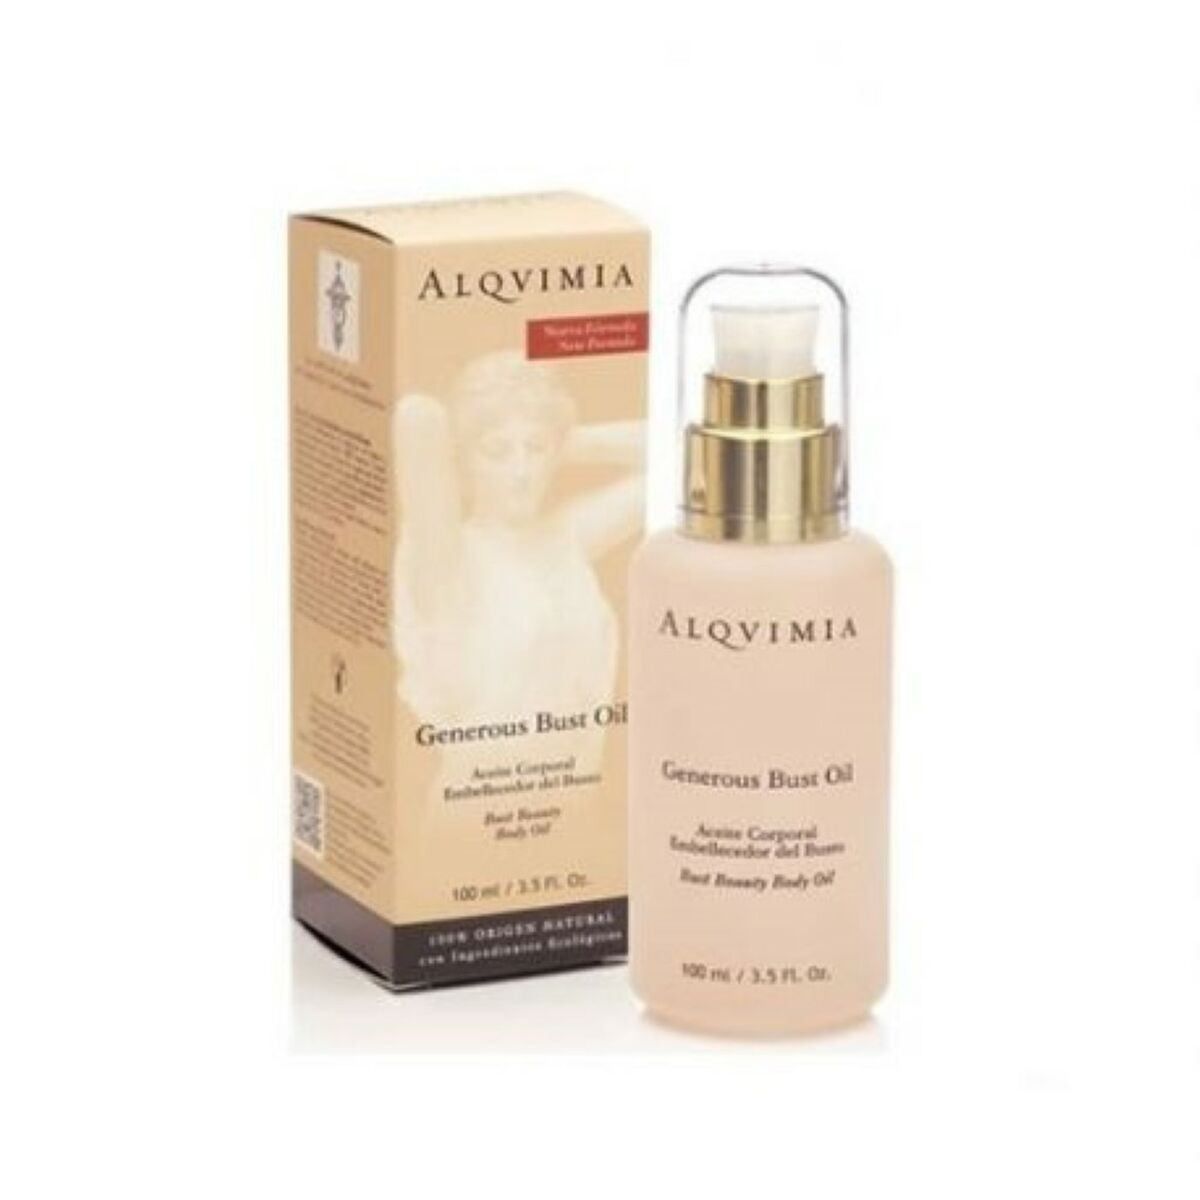 Firming Neck and Décolletage Cream Generous Bust Oil Alqvimia 100 ml-0